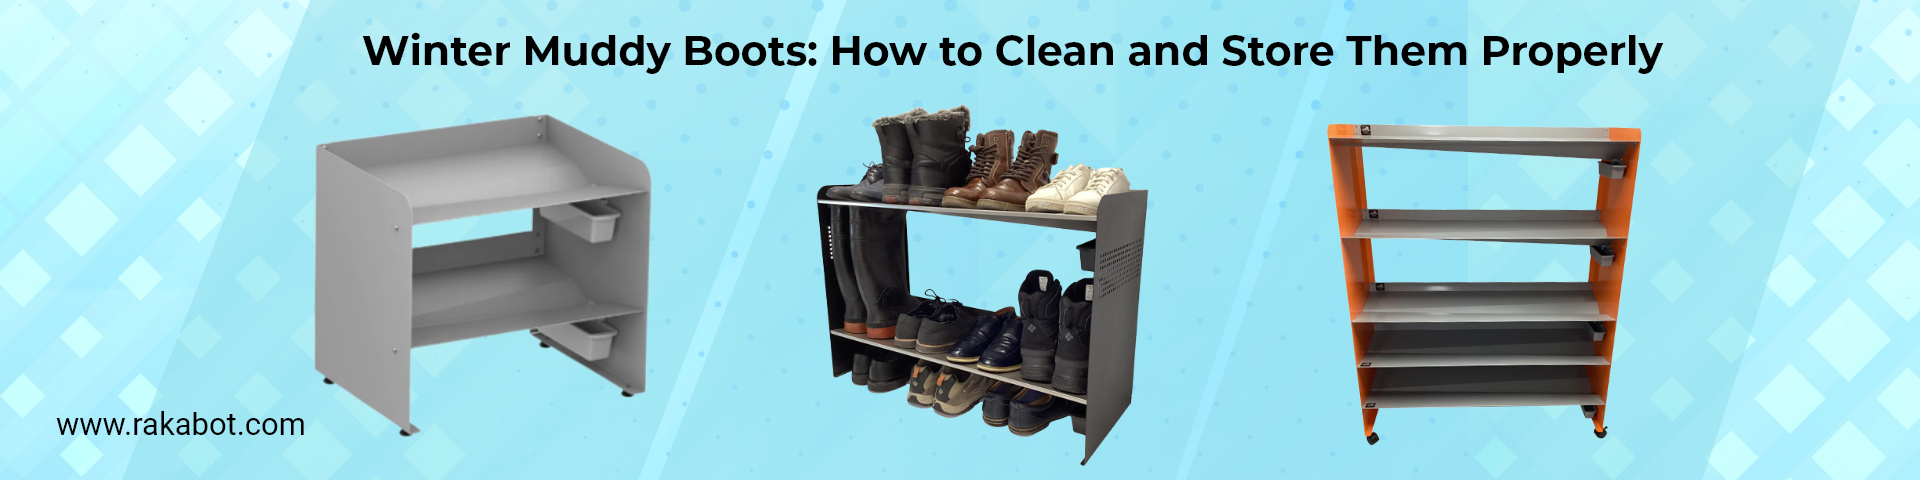 Get to know the Best Way to Store Snowy and Muddy Boots